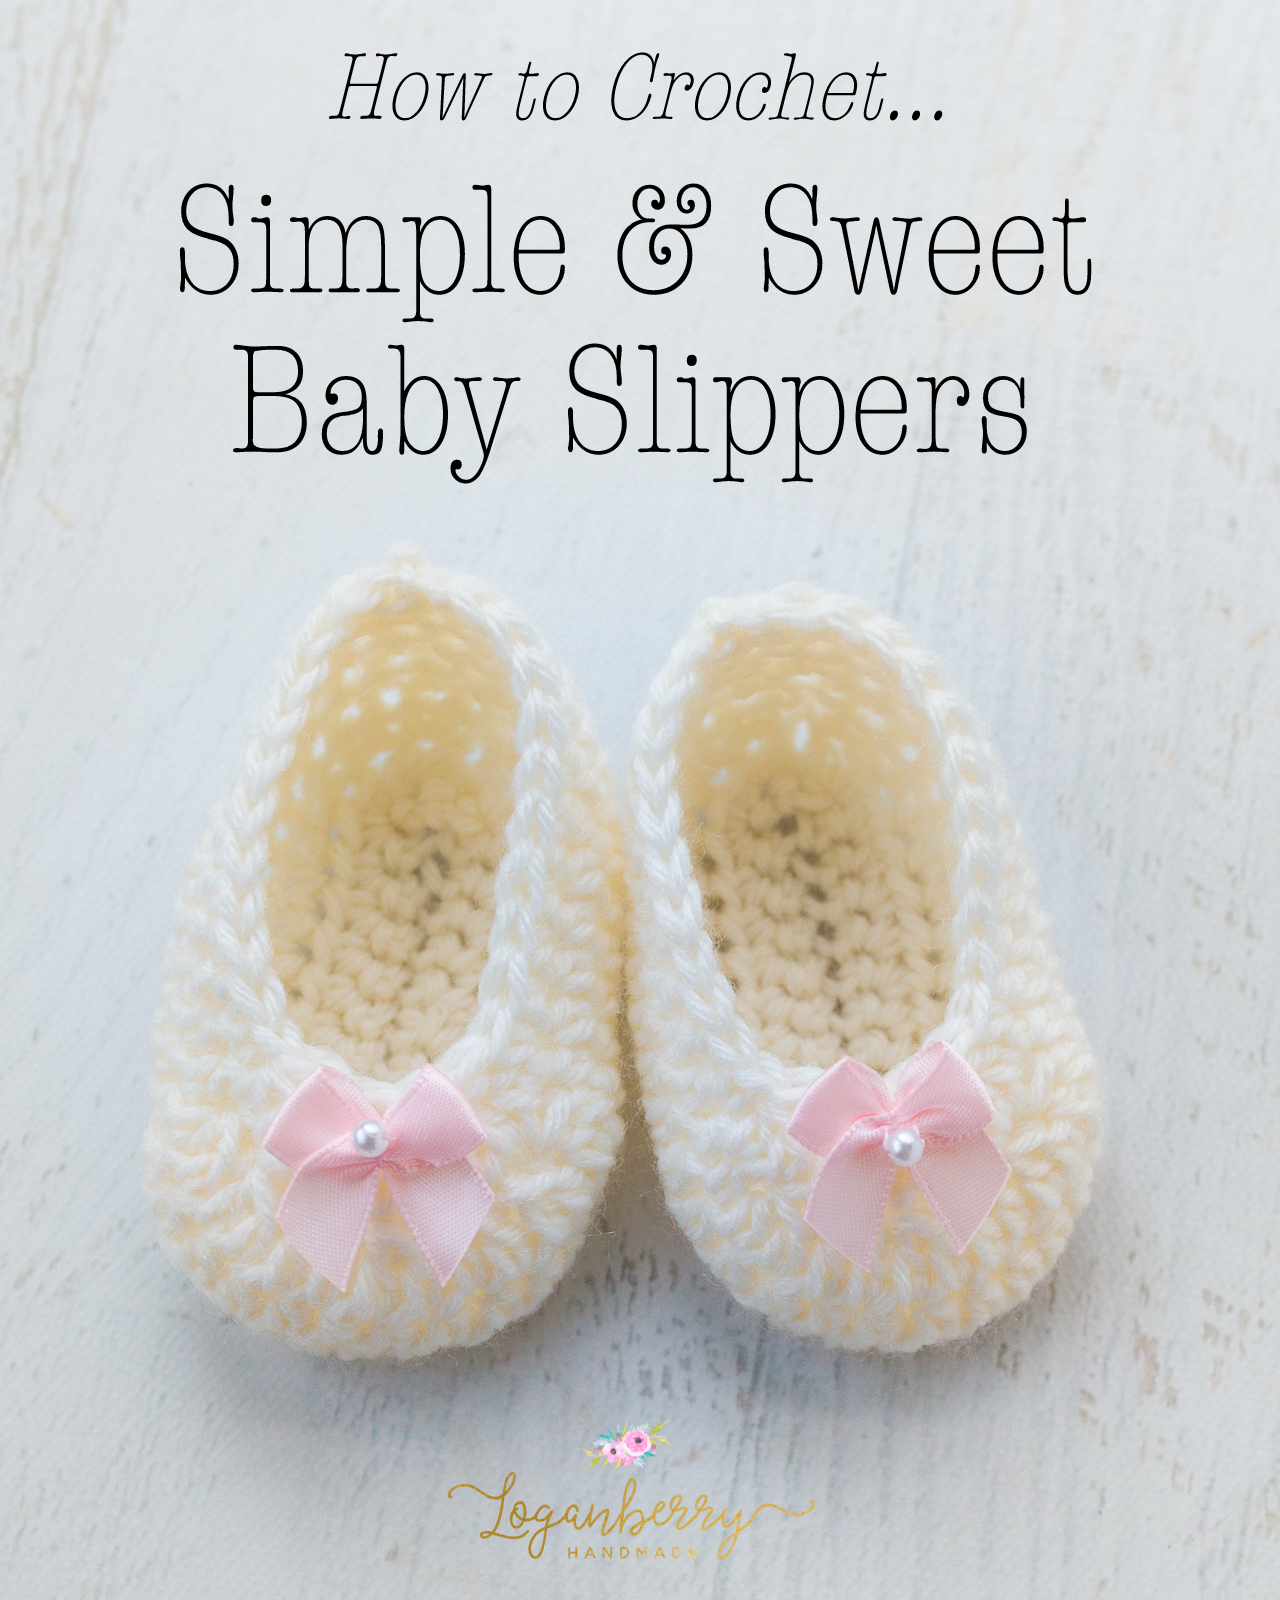 1 year baby slippers